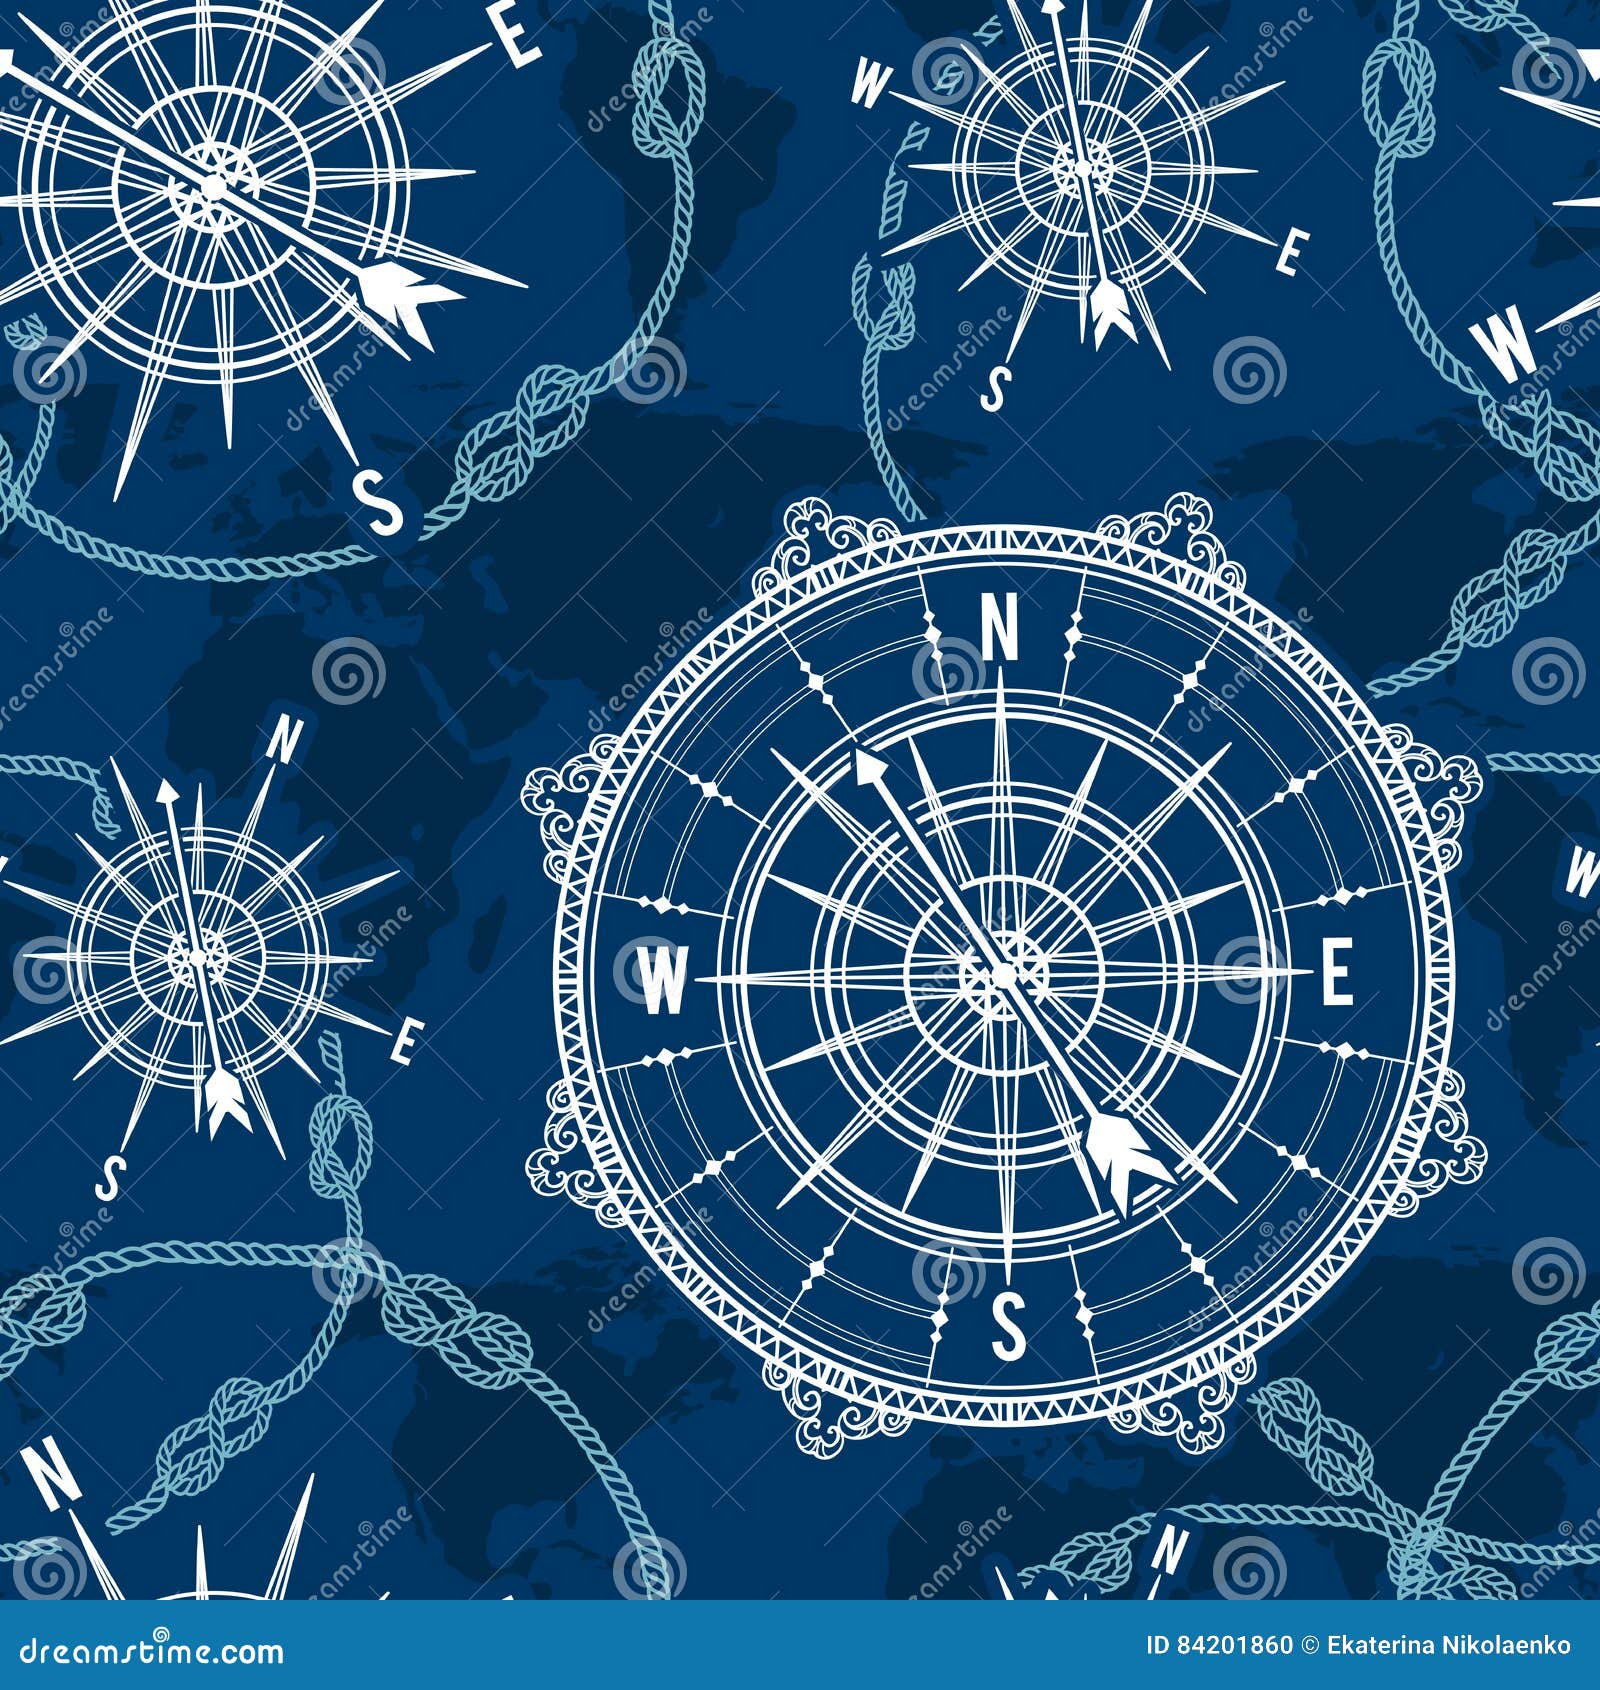 seamless pattern with vintage compass, world map, wind rose and rope knot. nautical background.